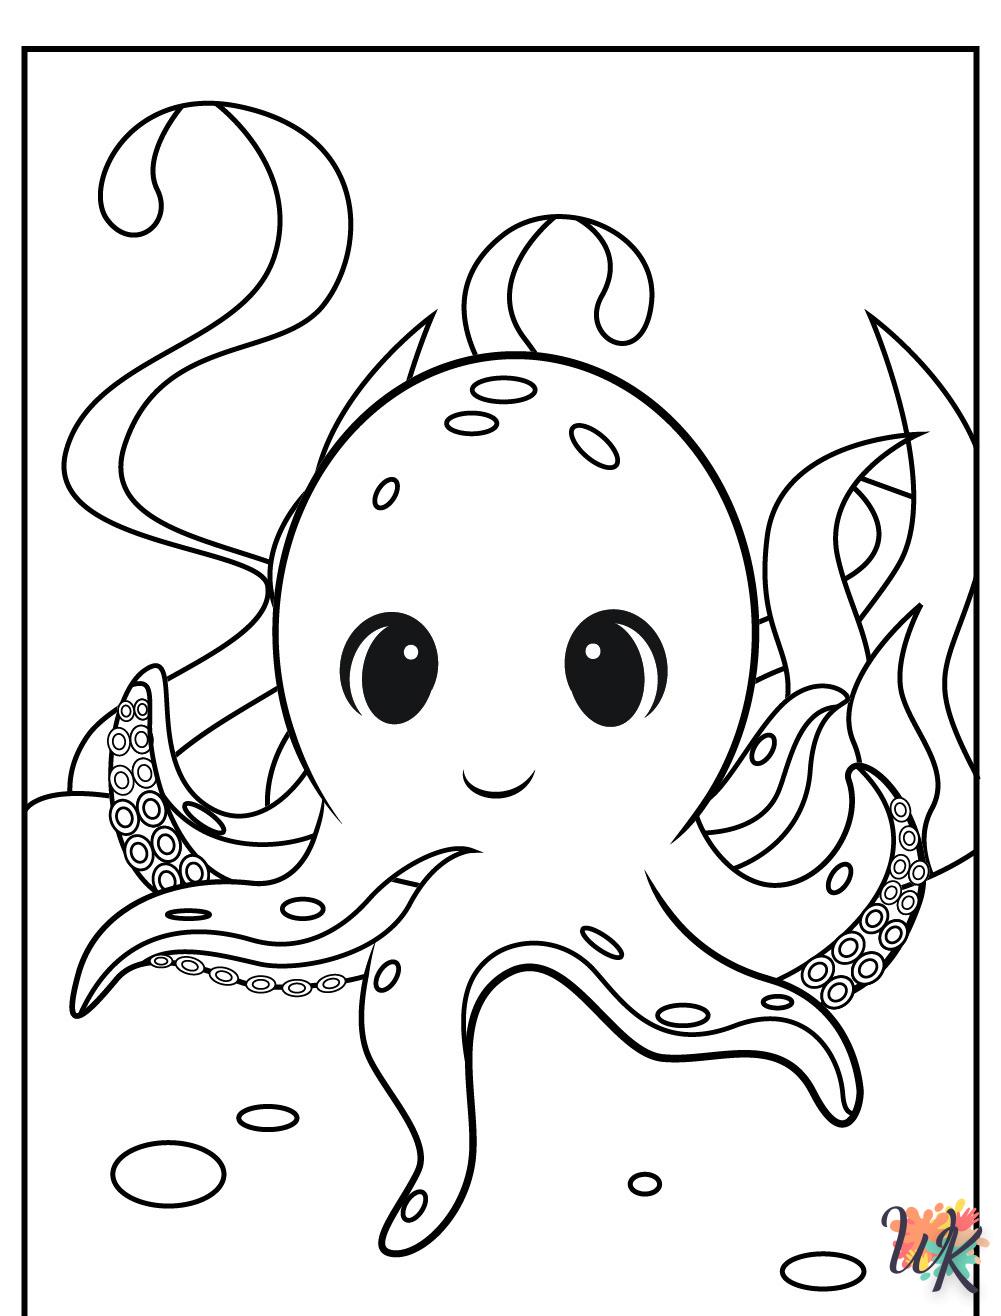 Octopus coloring for 7 year olds